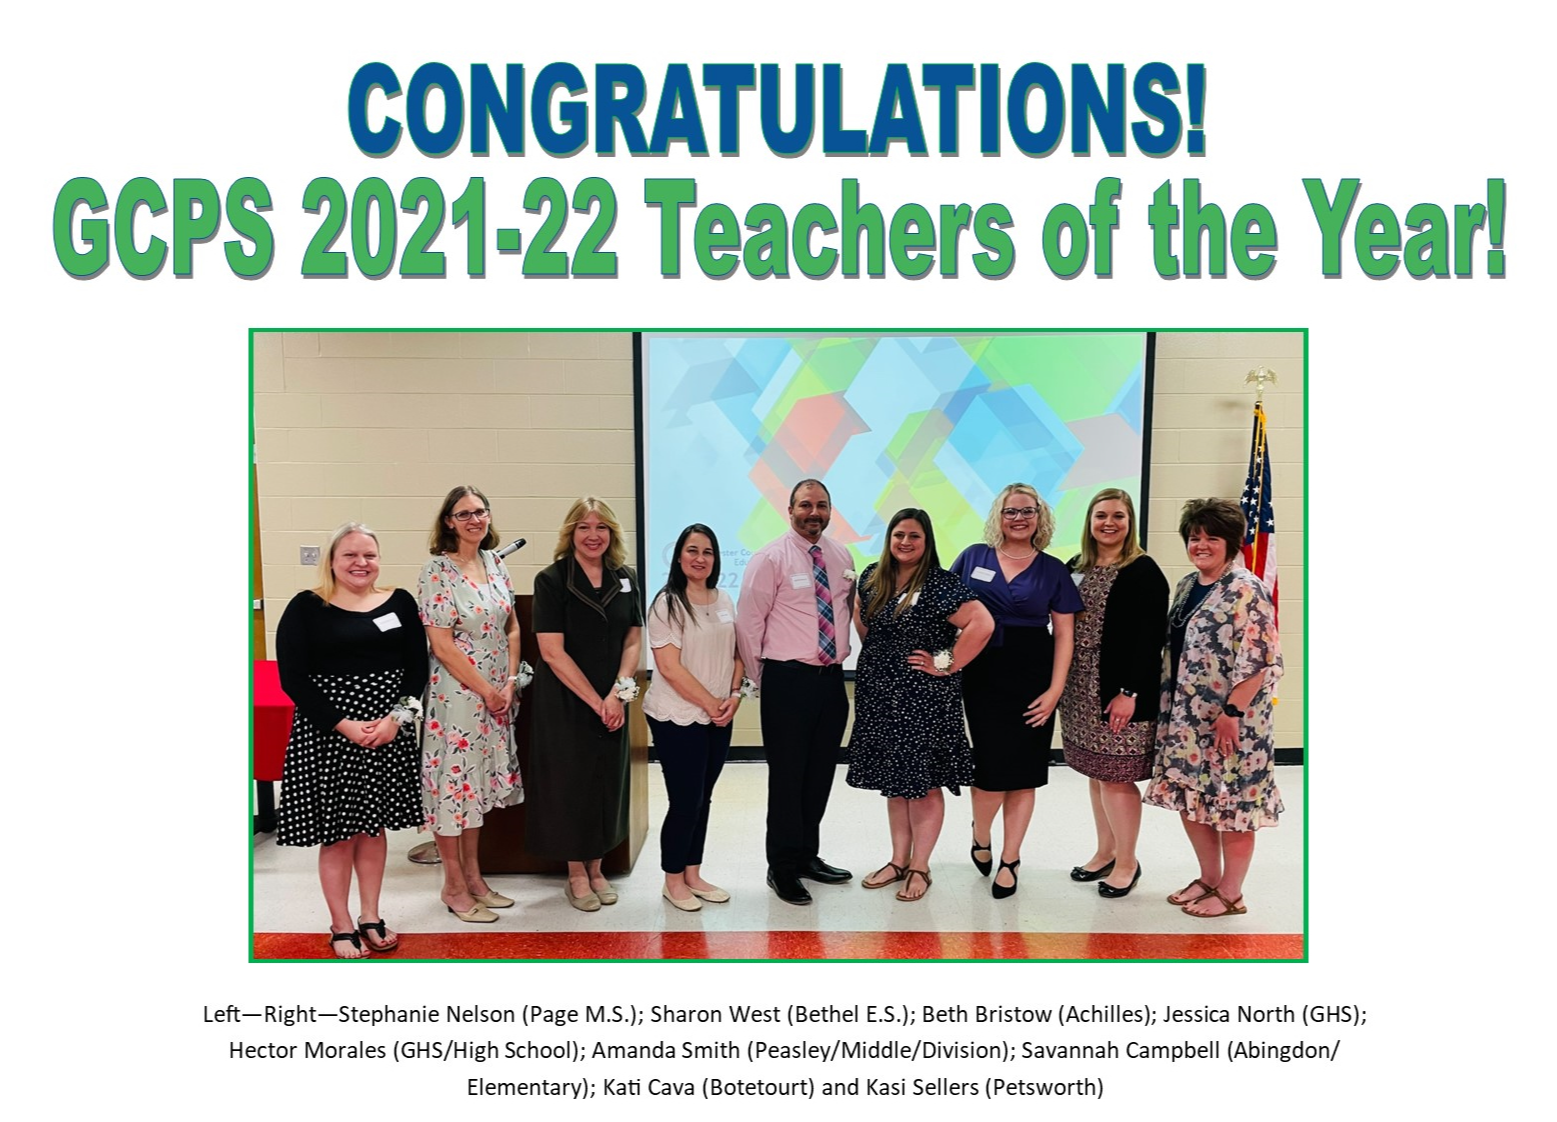 CONGRATULATIONS! GCPS 2021-22 Teachers of the Year! Left-Right-Stephanie Nelson (Page M.S.); Sharon West (Bethel E.S.); Beth Bristow (Achilles); Jessica North (GHS); Hector Morales (GHS/High School); Amanda Smith (Peasley/Middle/Division); Savannah Campbell (Abingdon/ Elementary); Kati Cava (Botetourt) and Kasi Sellers (Petsworth)